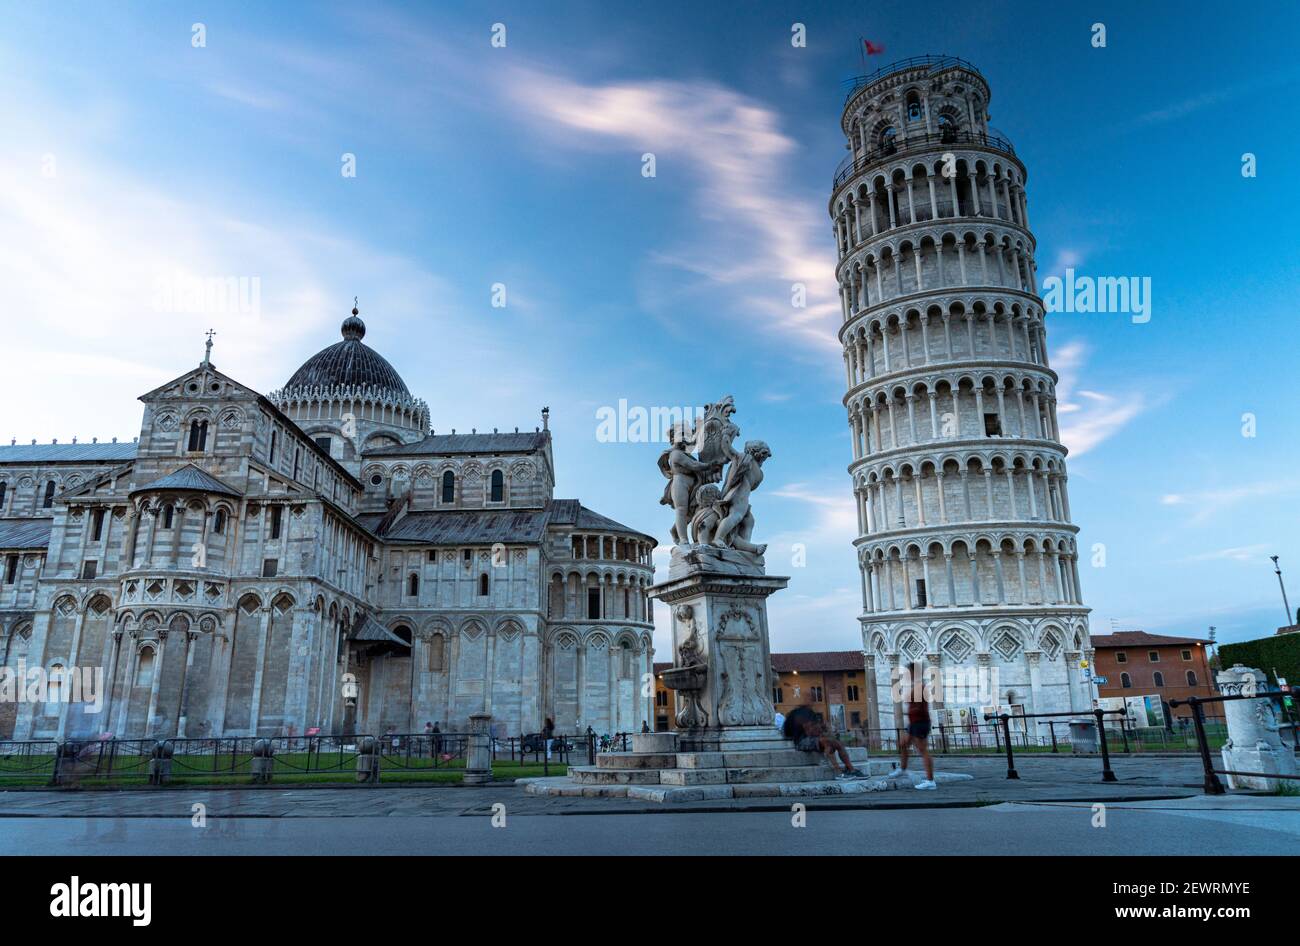 The famous Piazza dei Miracoli with Pisa Cathedral (Duomo) and Leaning Tower, UNESCO World Heritage Site, Pisa, Tuscany, Italy, Europe Stock Photo